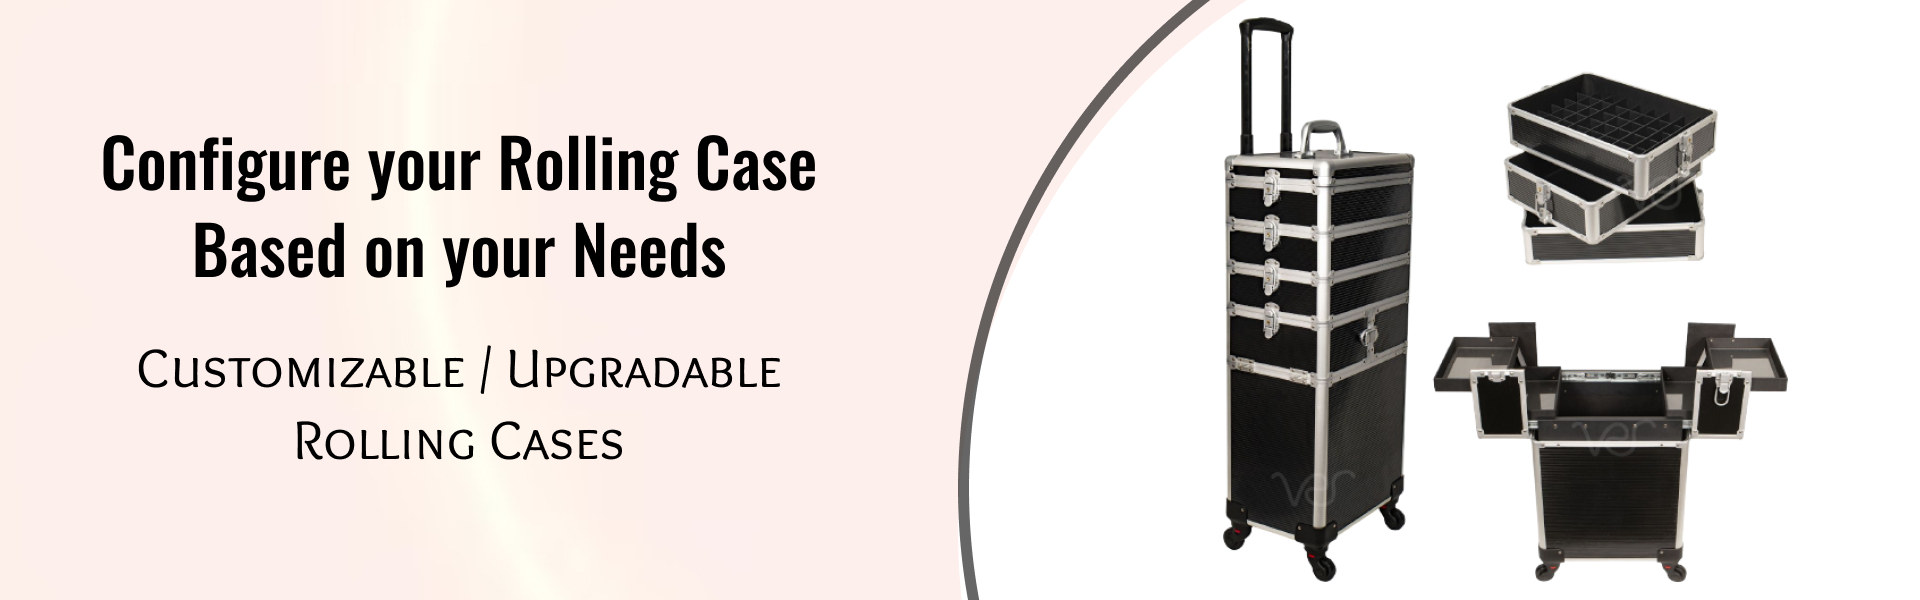 Configure your Rolling case Based on your needs